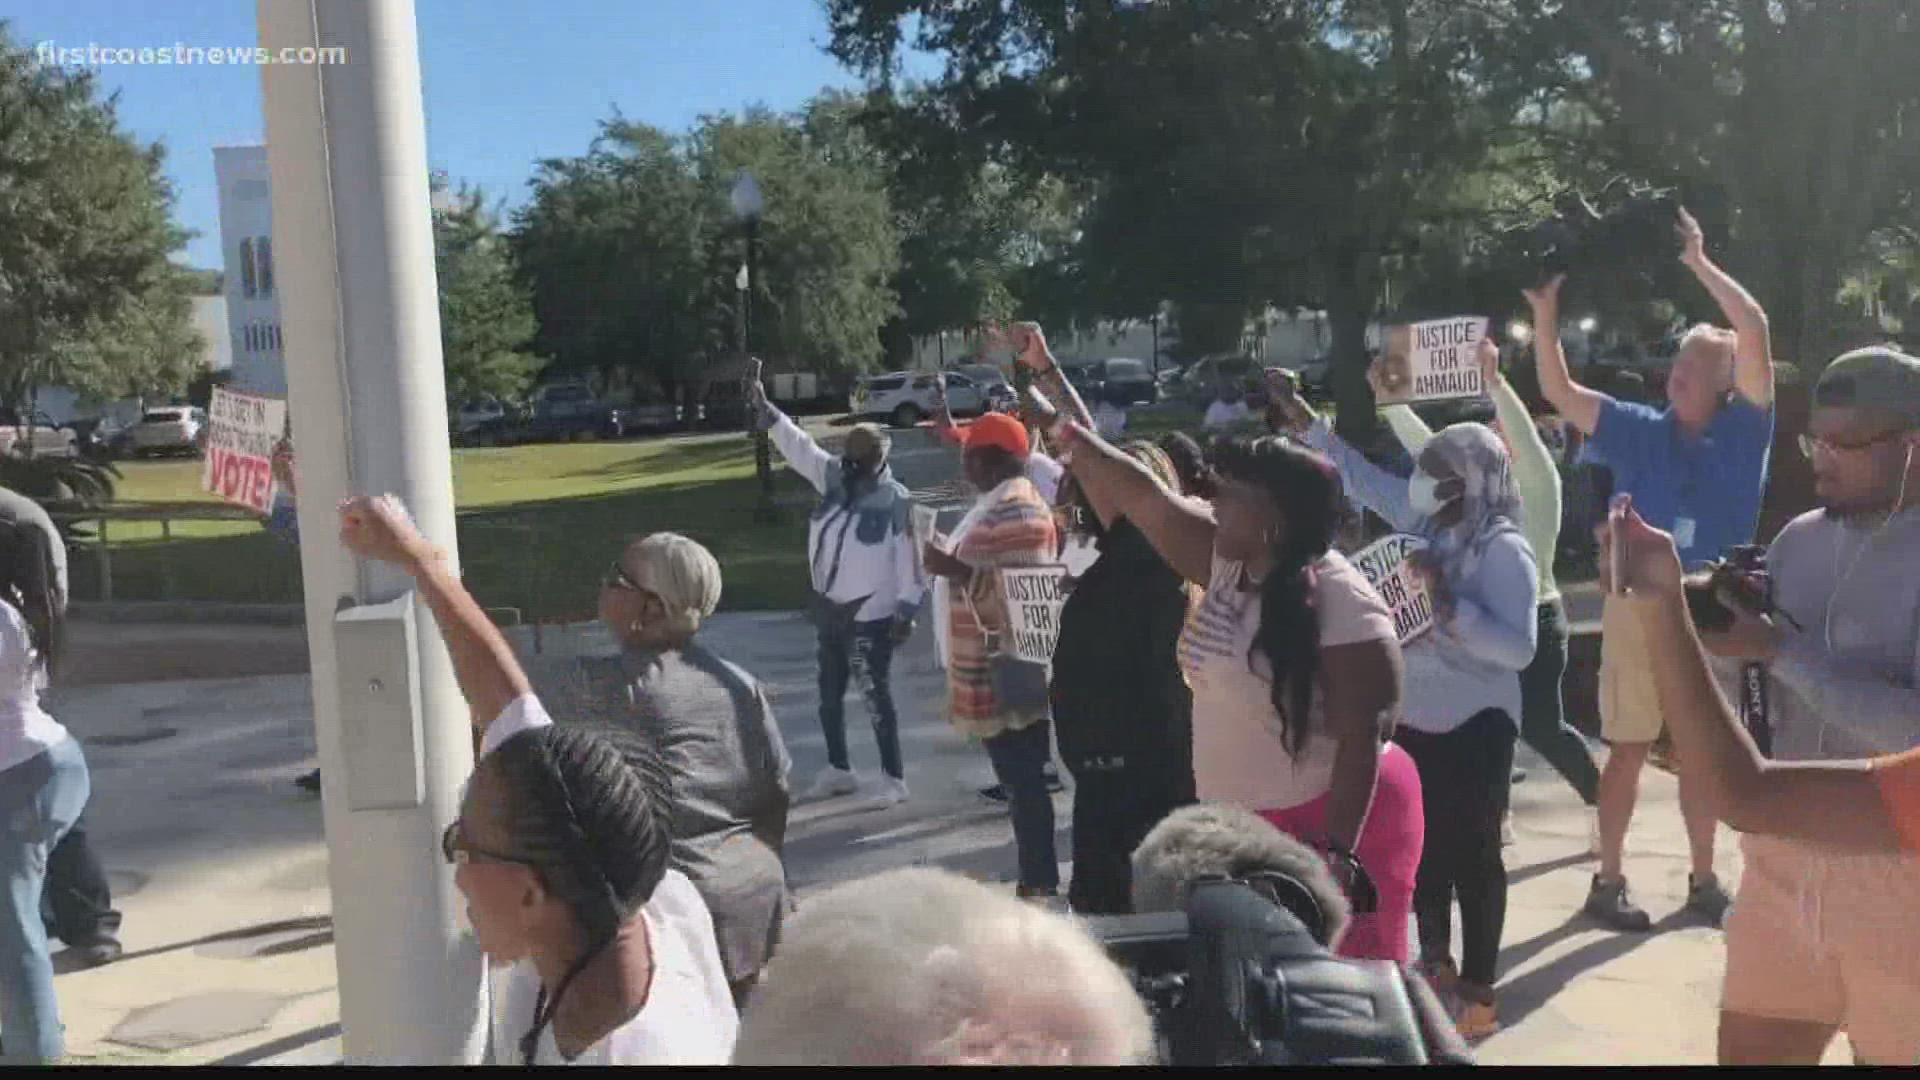 The judge denied a motion from the defense seeking to prevent protests at the courthouse, saying he will not limit First Amendment rights in a public place.